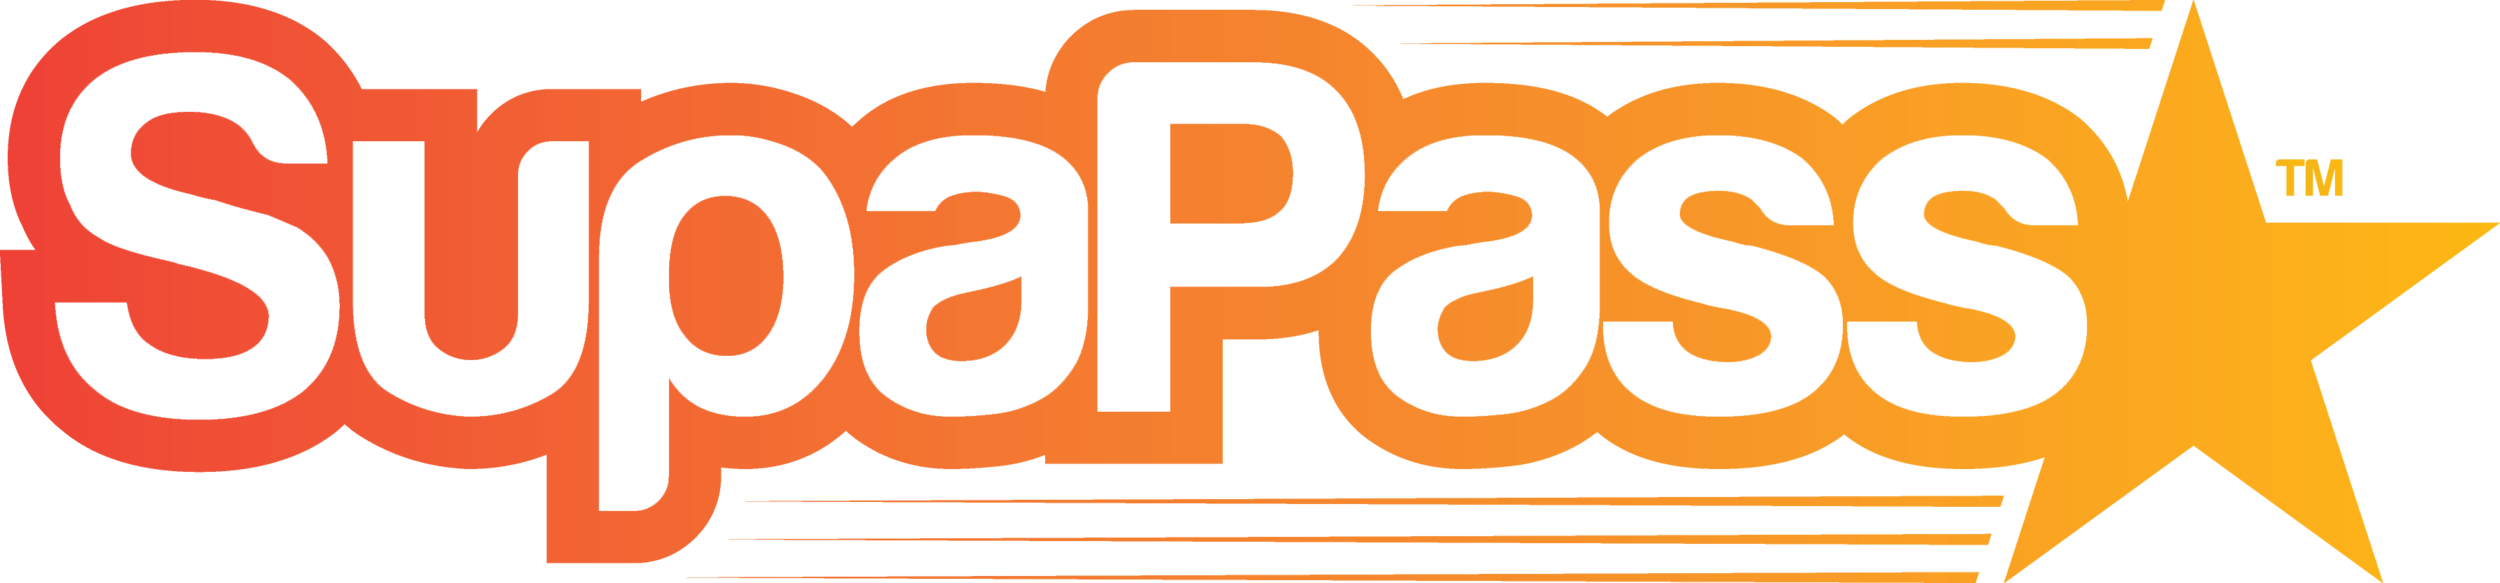 Supapass-Logo-Clear-full-res.png